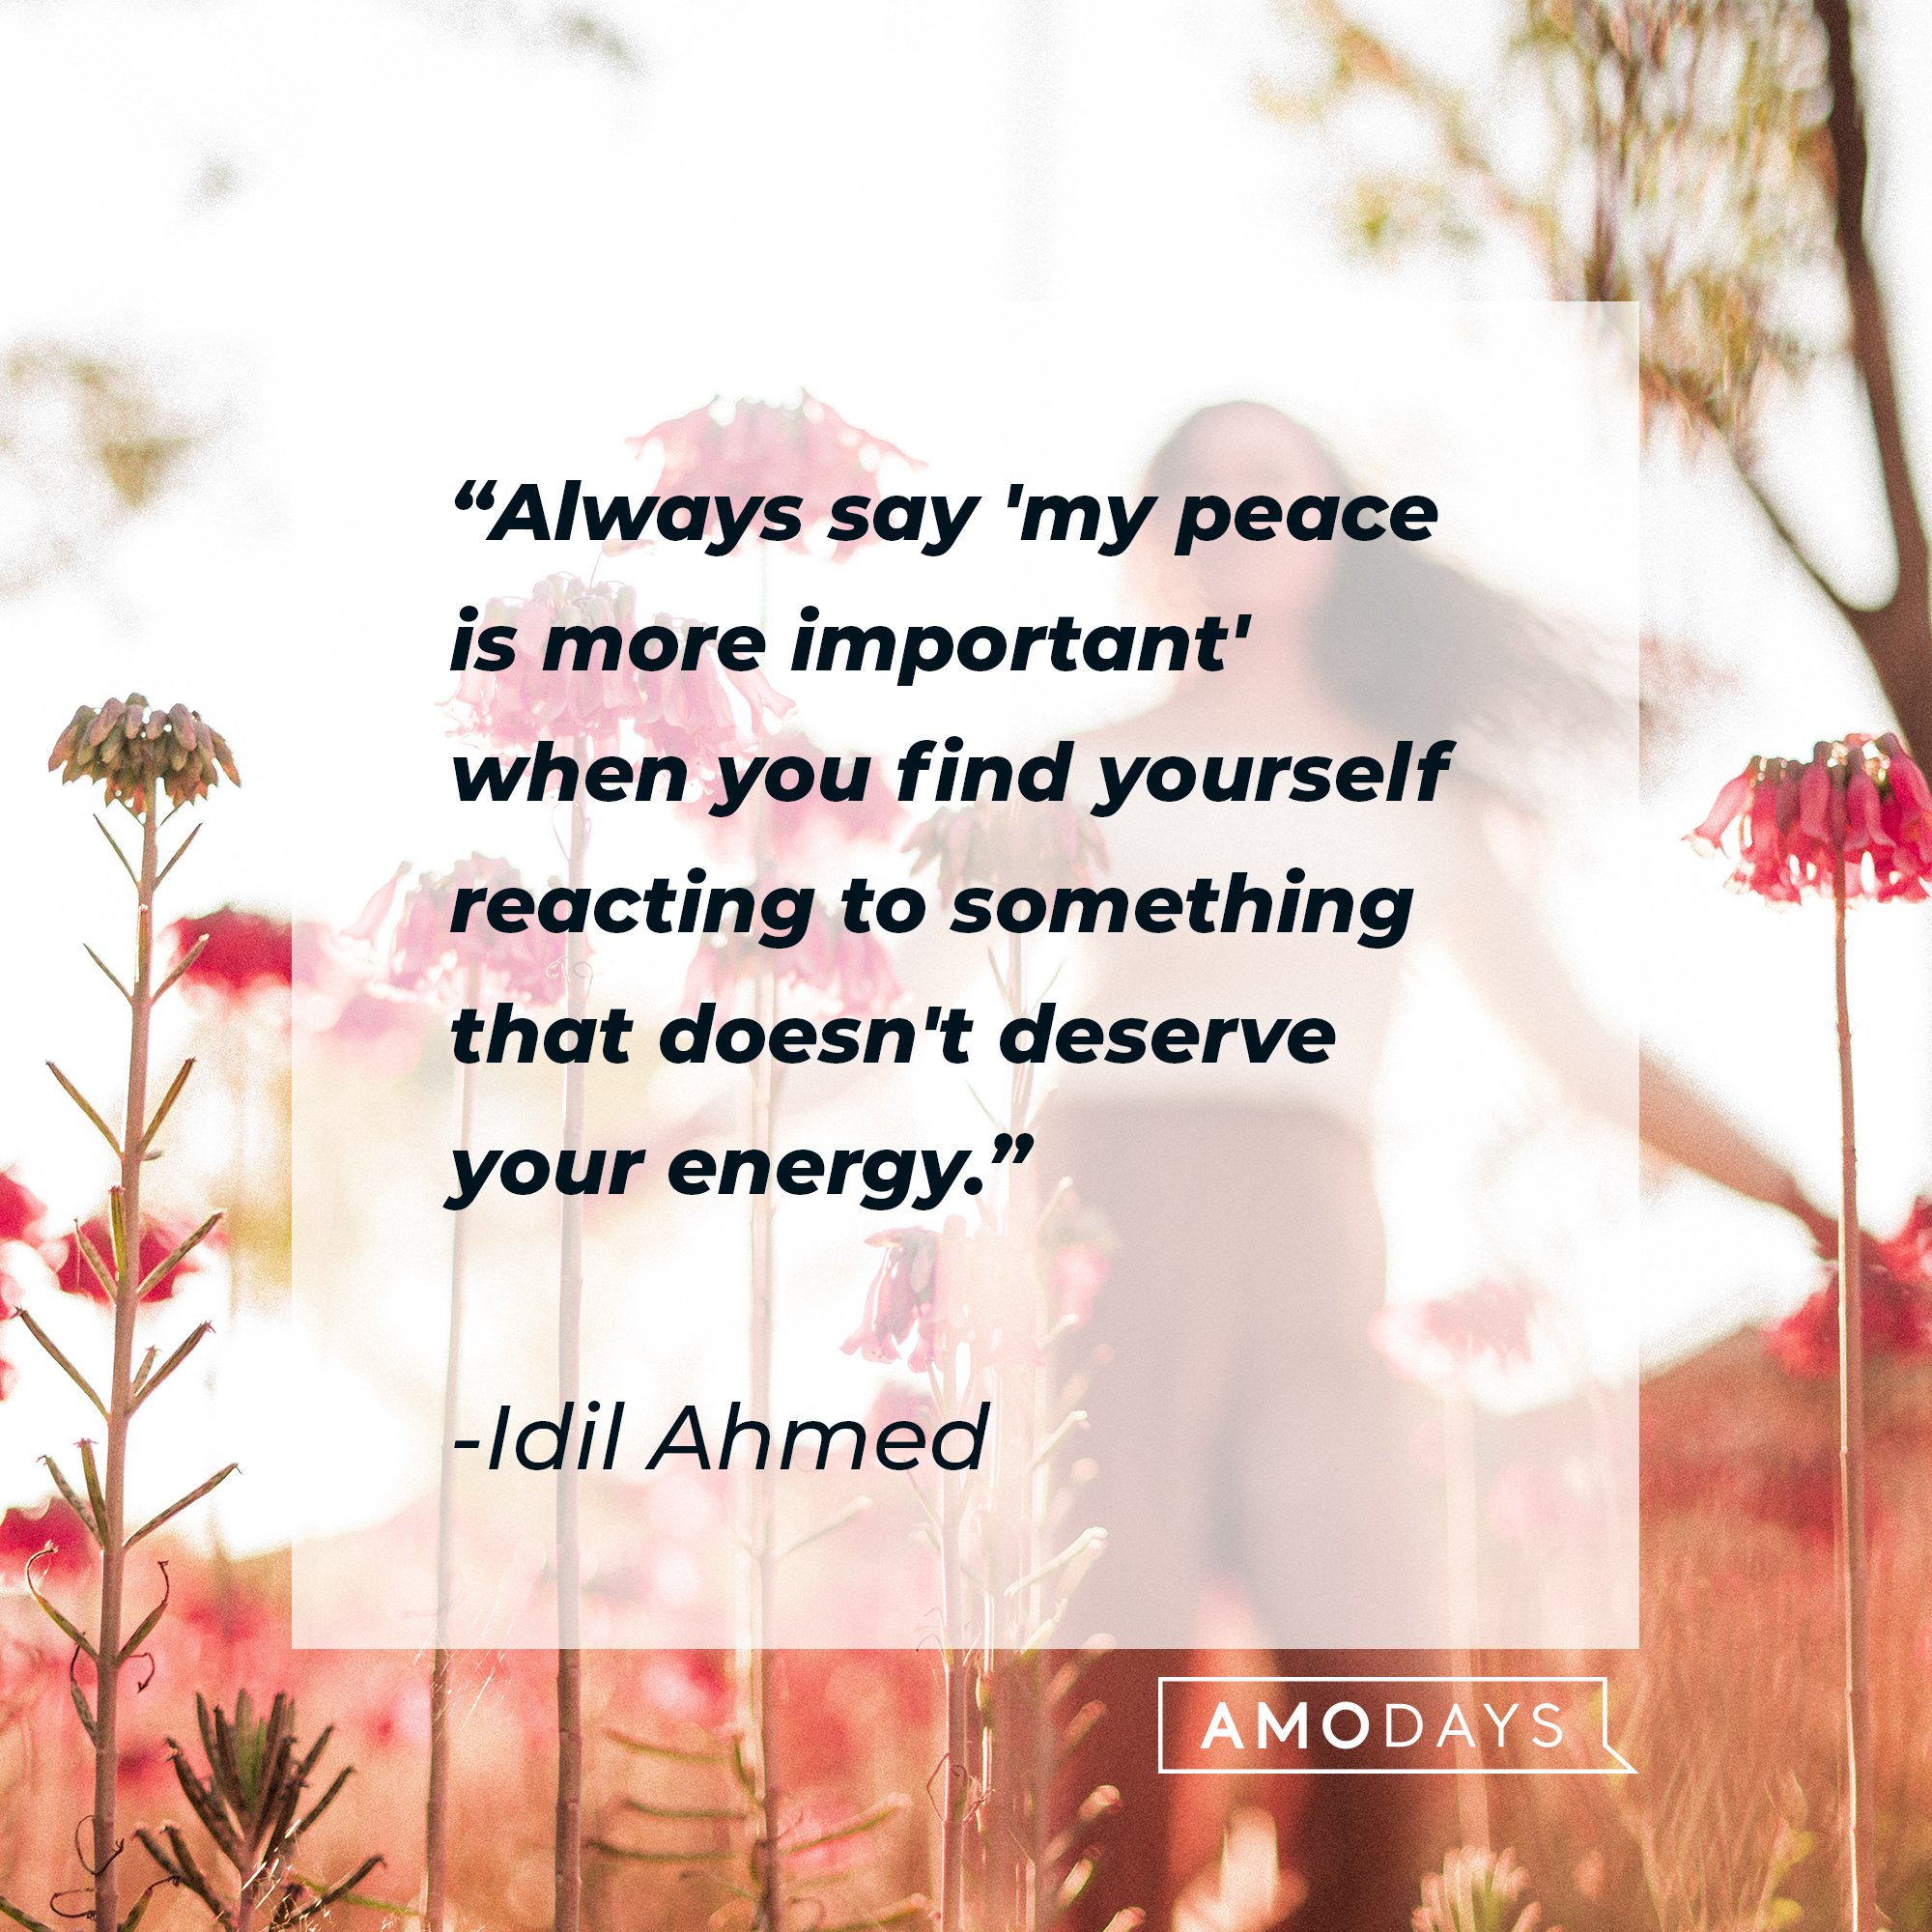 Idil Ahmed’s quote: “Always say 'my peace is more important' when you find yourself reacting to something that doesn’t deserve your energy.” | Image: AmoDays